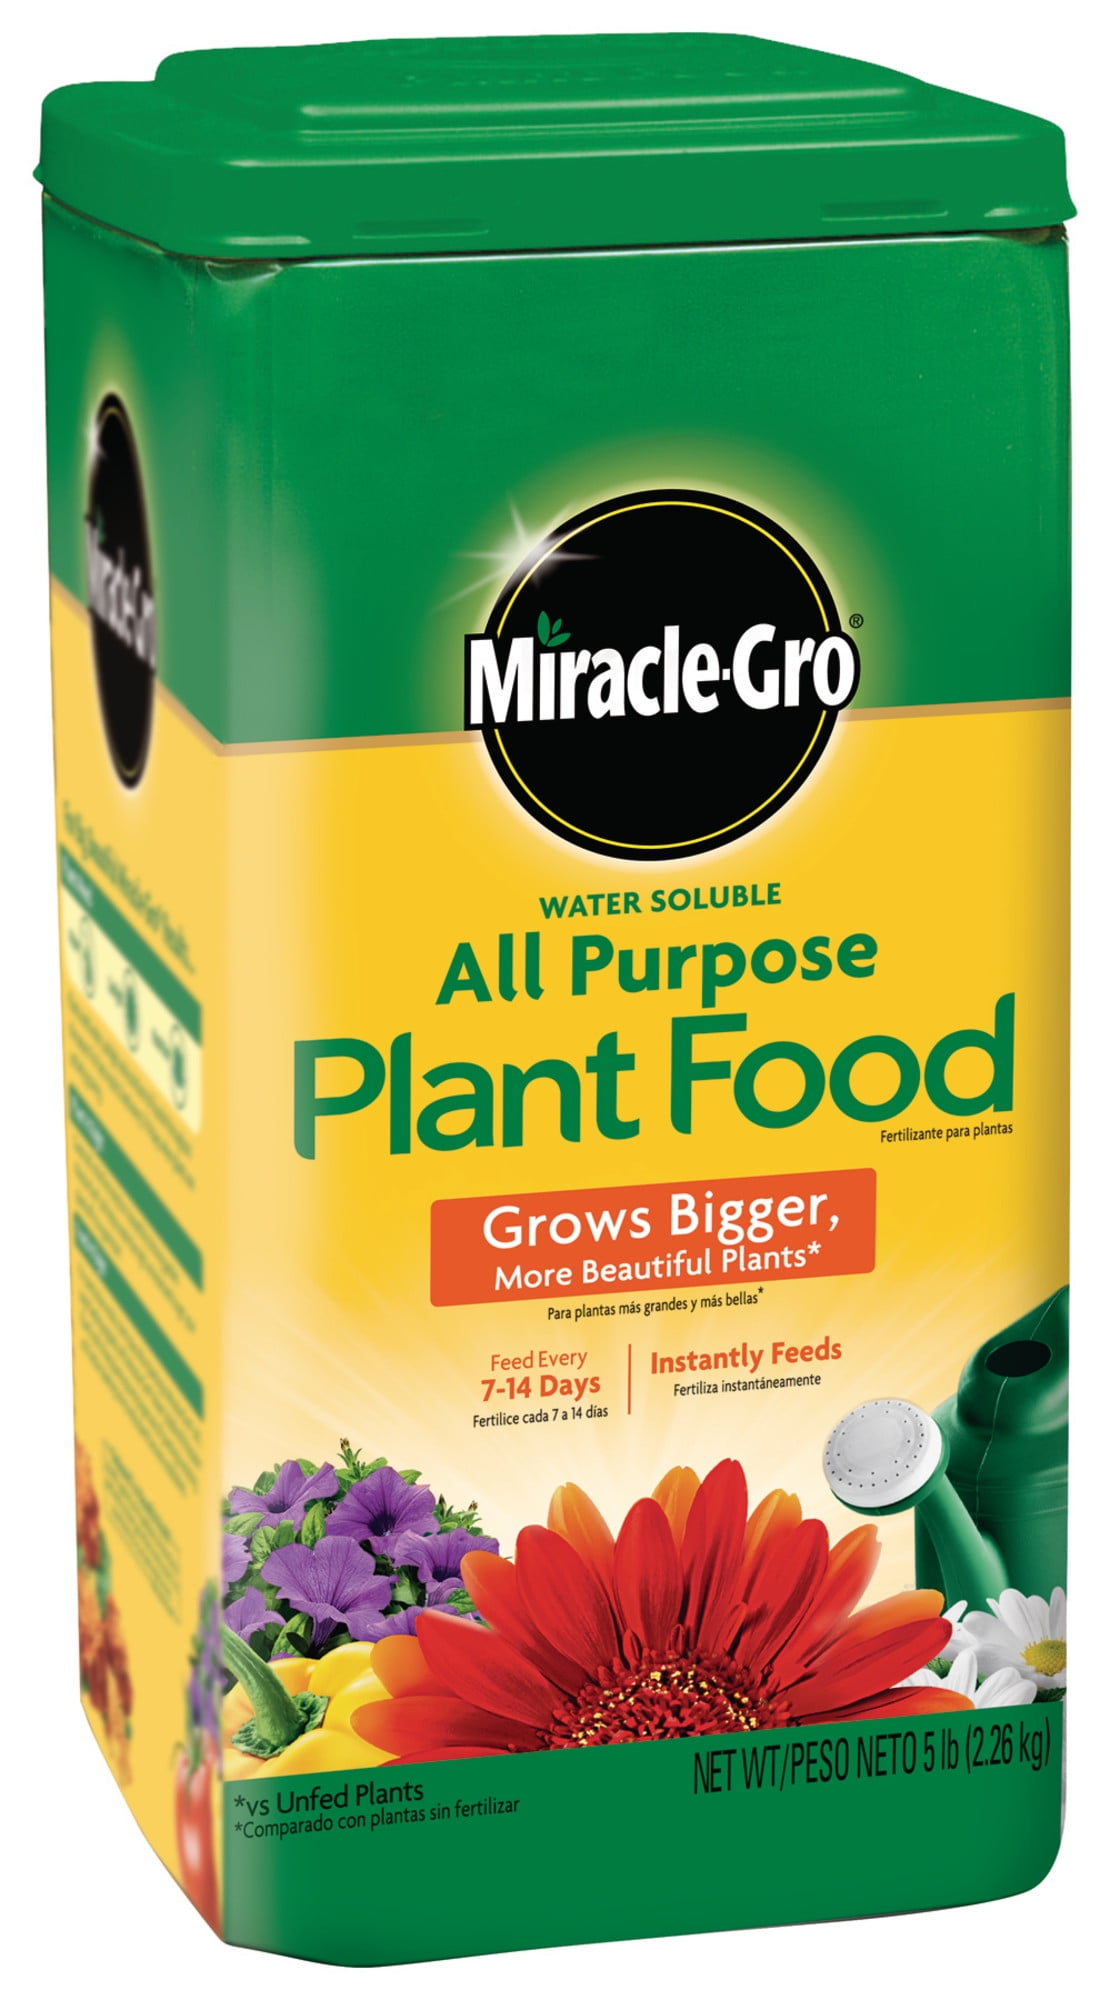 5-Lbs. Miracle-Gro Water Soluble All Purpose Plant Food $9.95 + Free S&H w/ Walmart+ or $35+